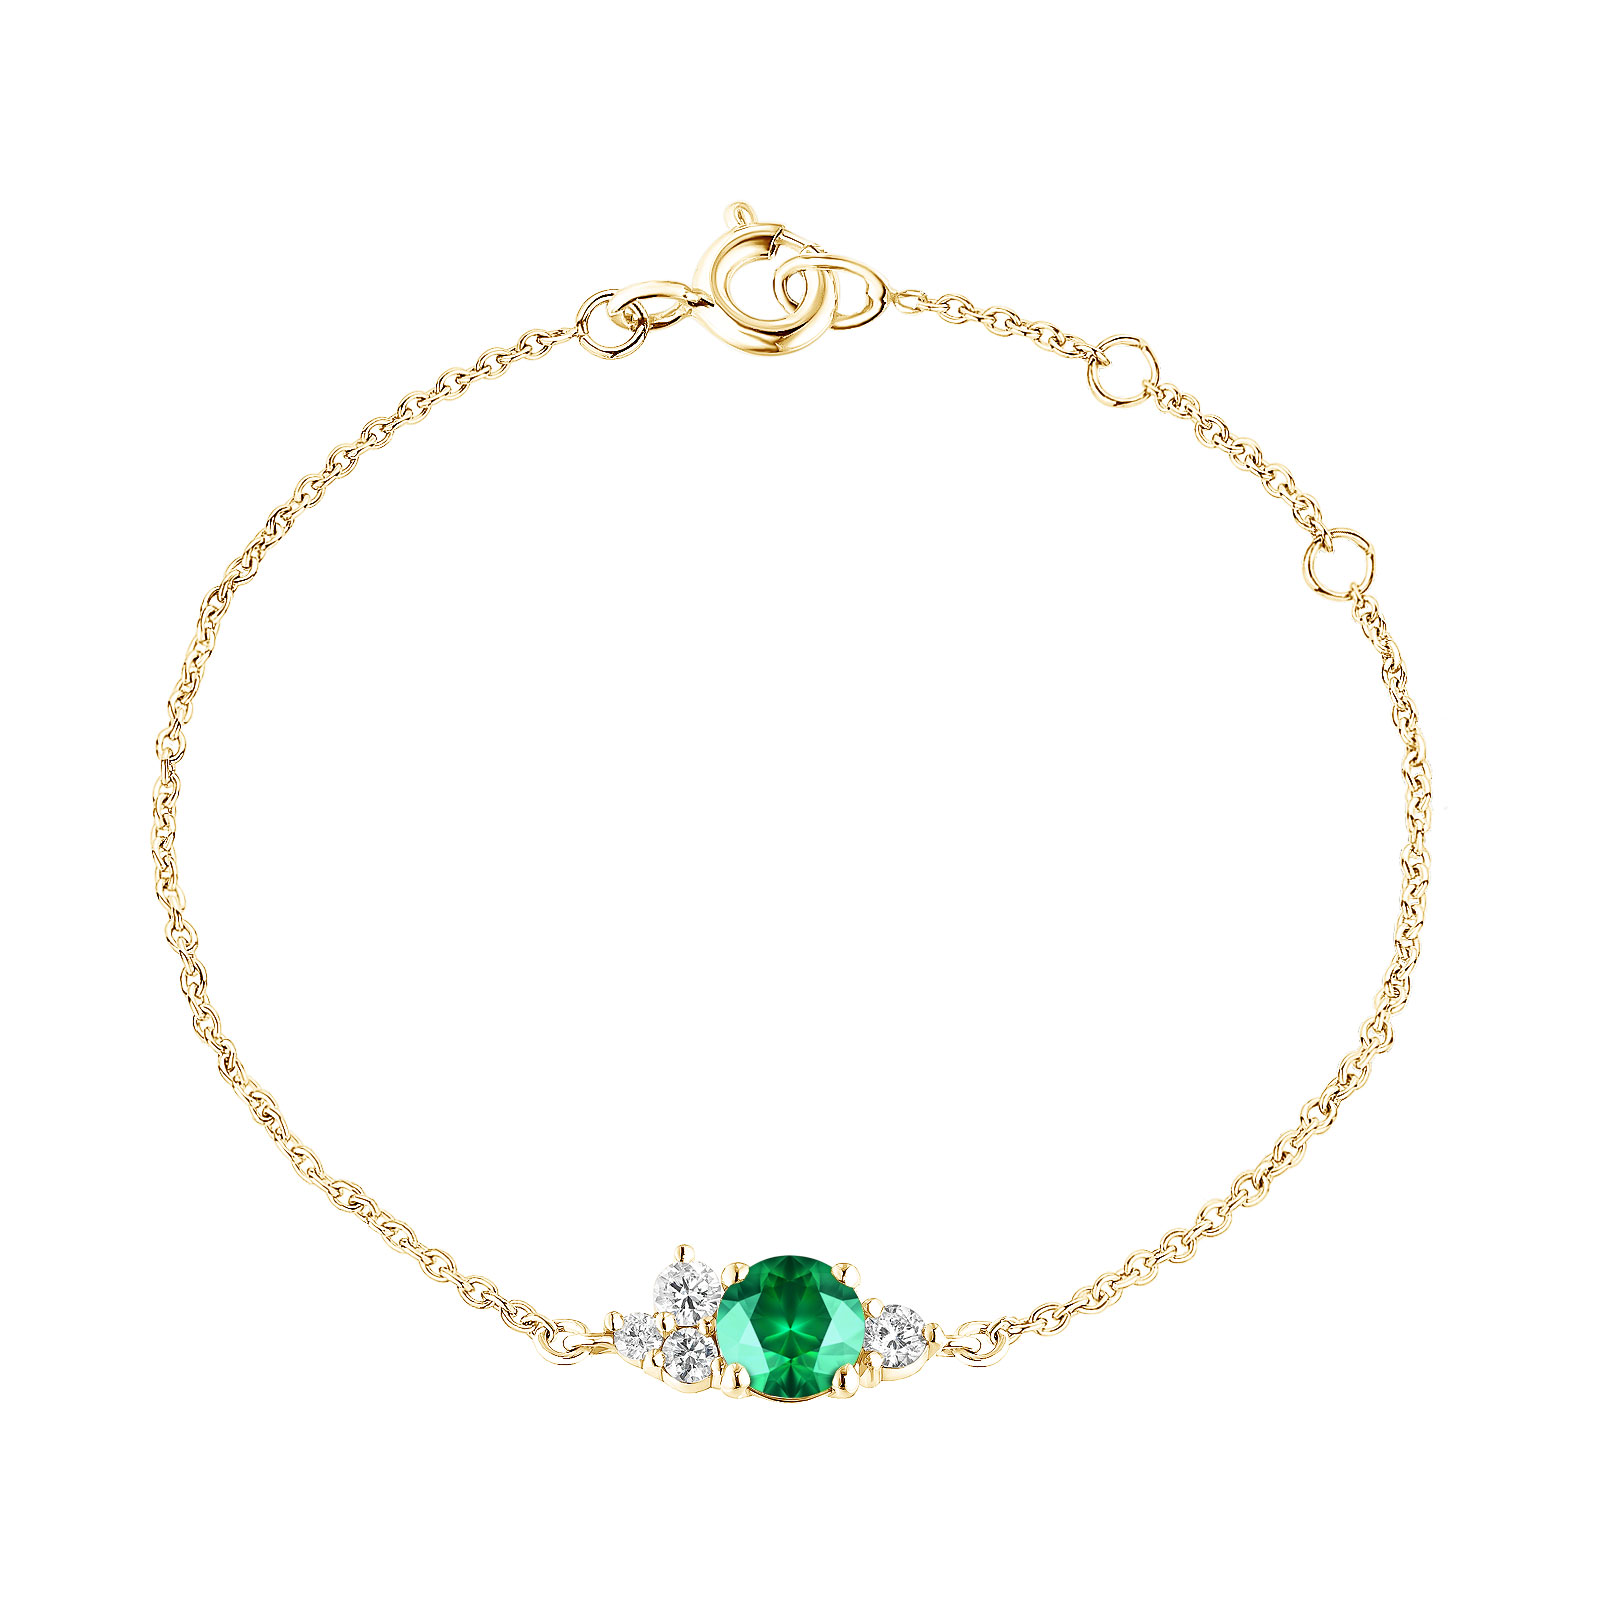 Bracelet Yellow gold Emerald and diamonds Baby EverBloom 1